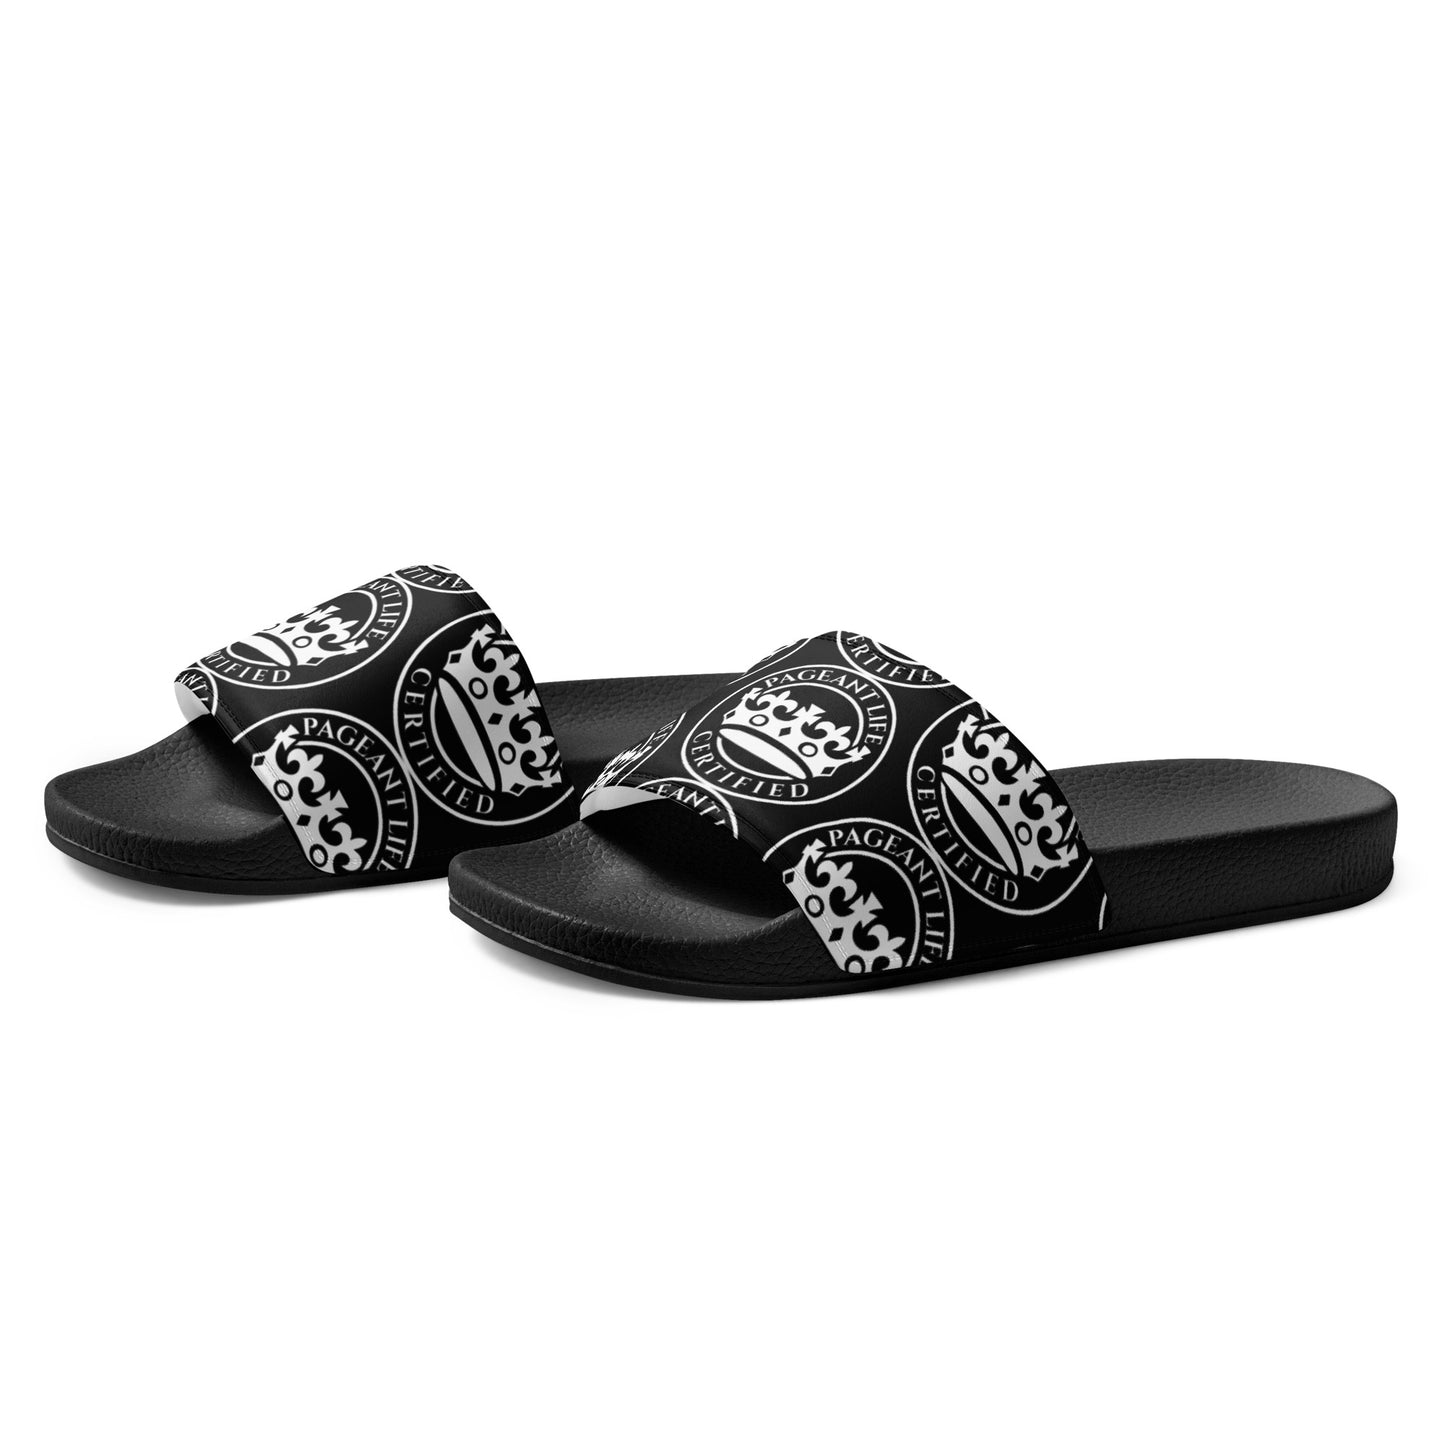 Black and White Pageant Life Certified Women's slides